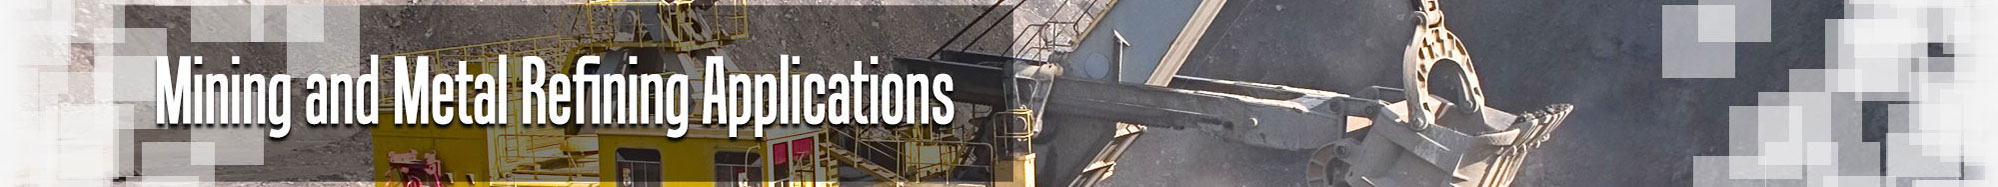 Mining and Metal Refining Applications